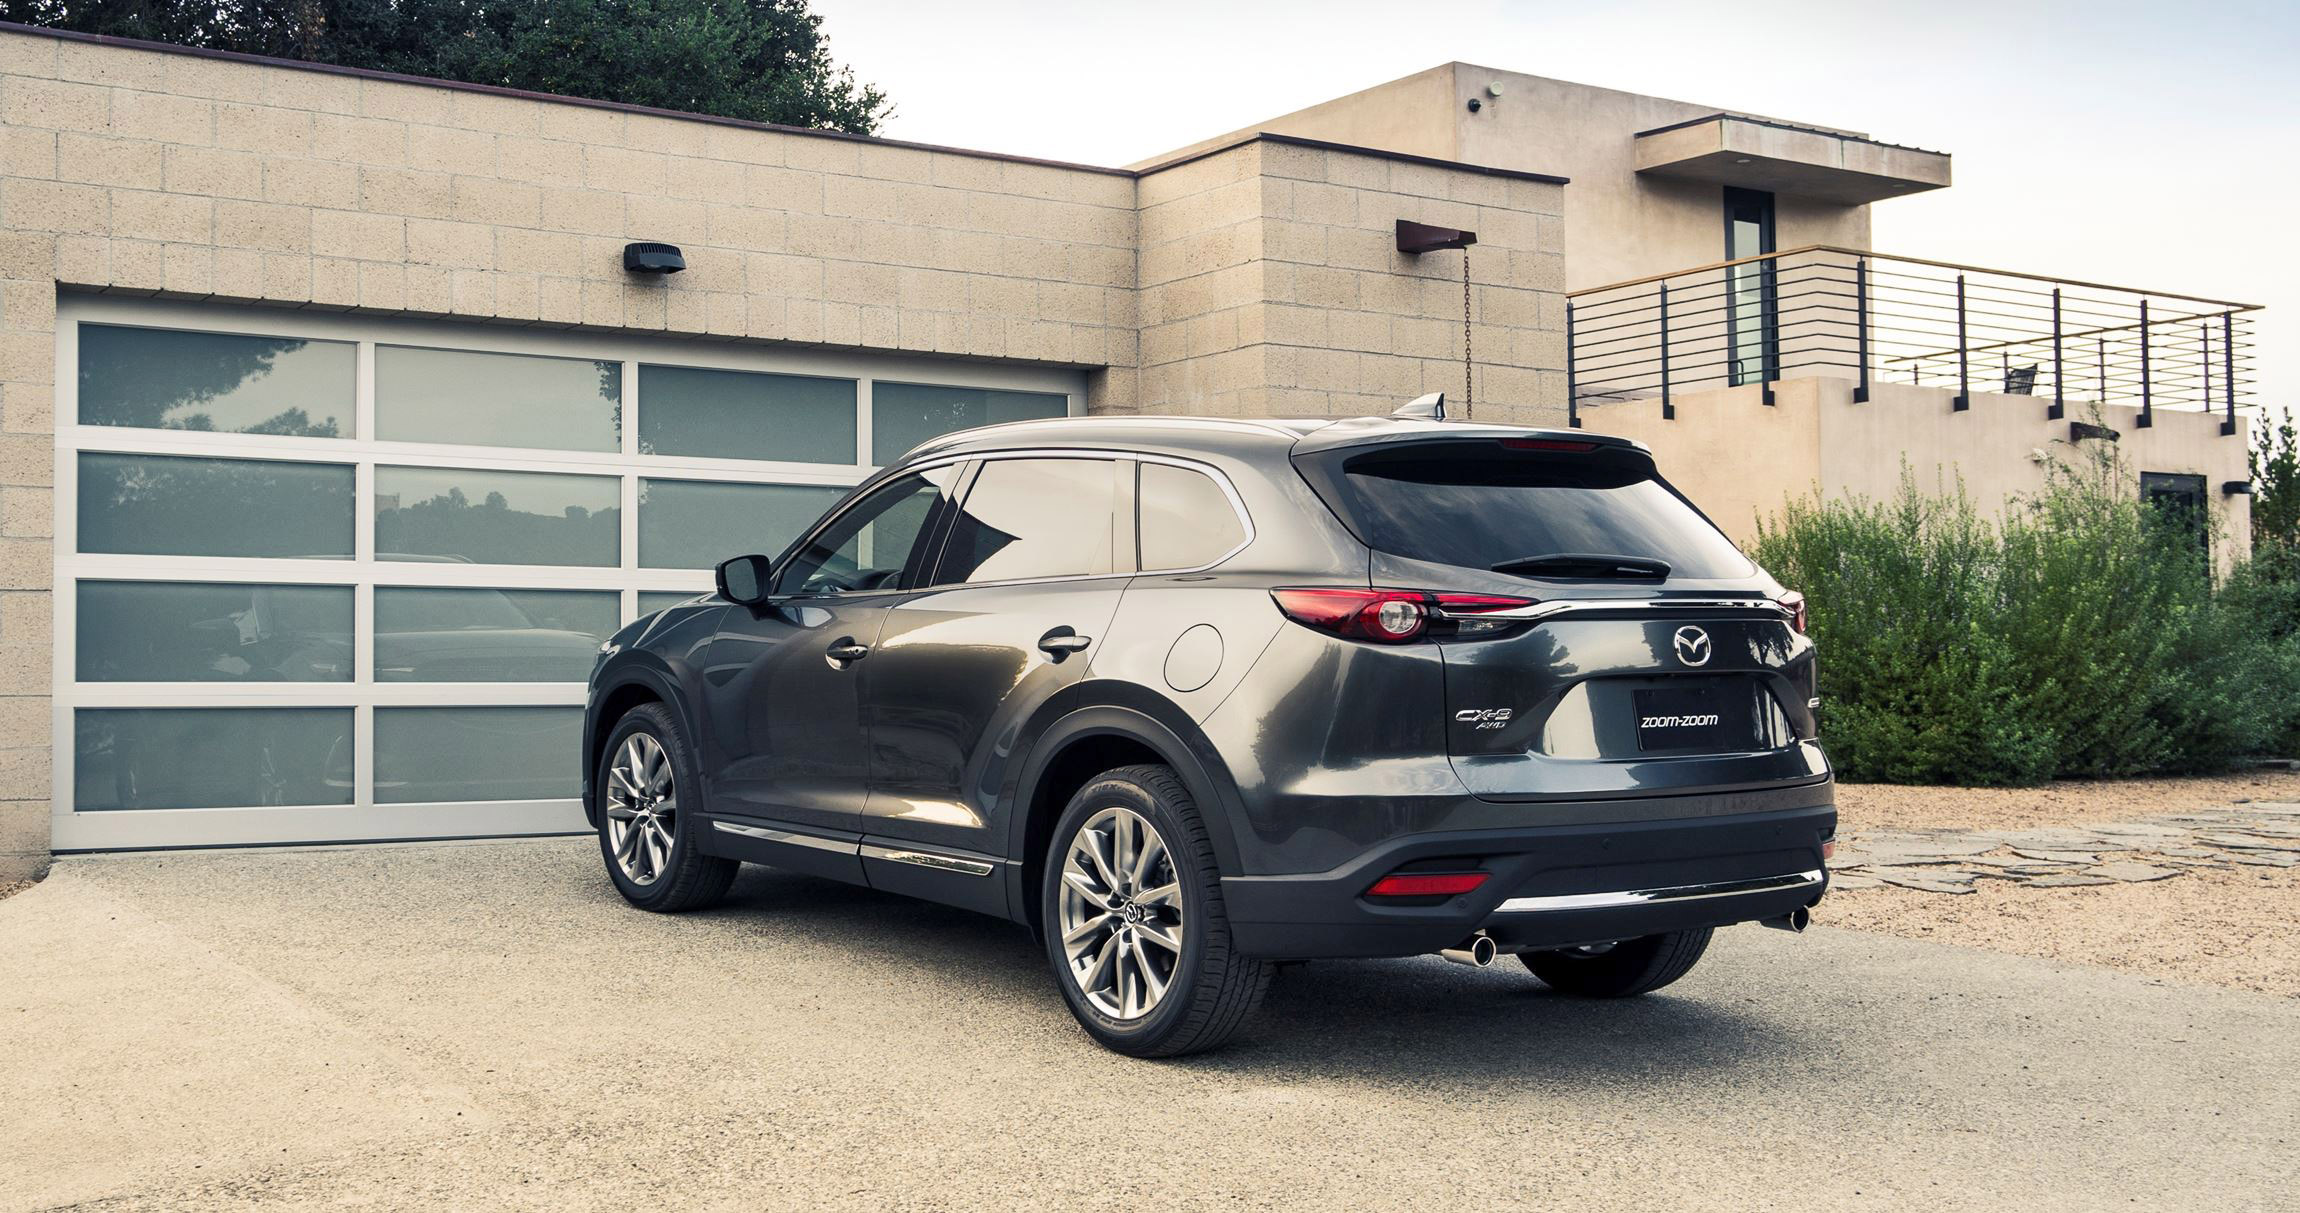 2017 Mazda CX-9 Revealed: Gorgeous Redesign, Lux Cabin and ...